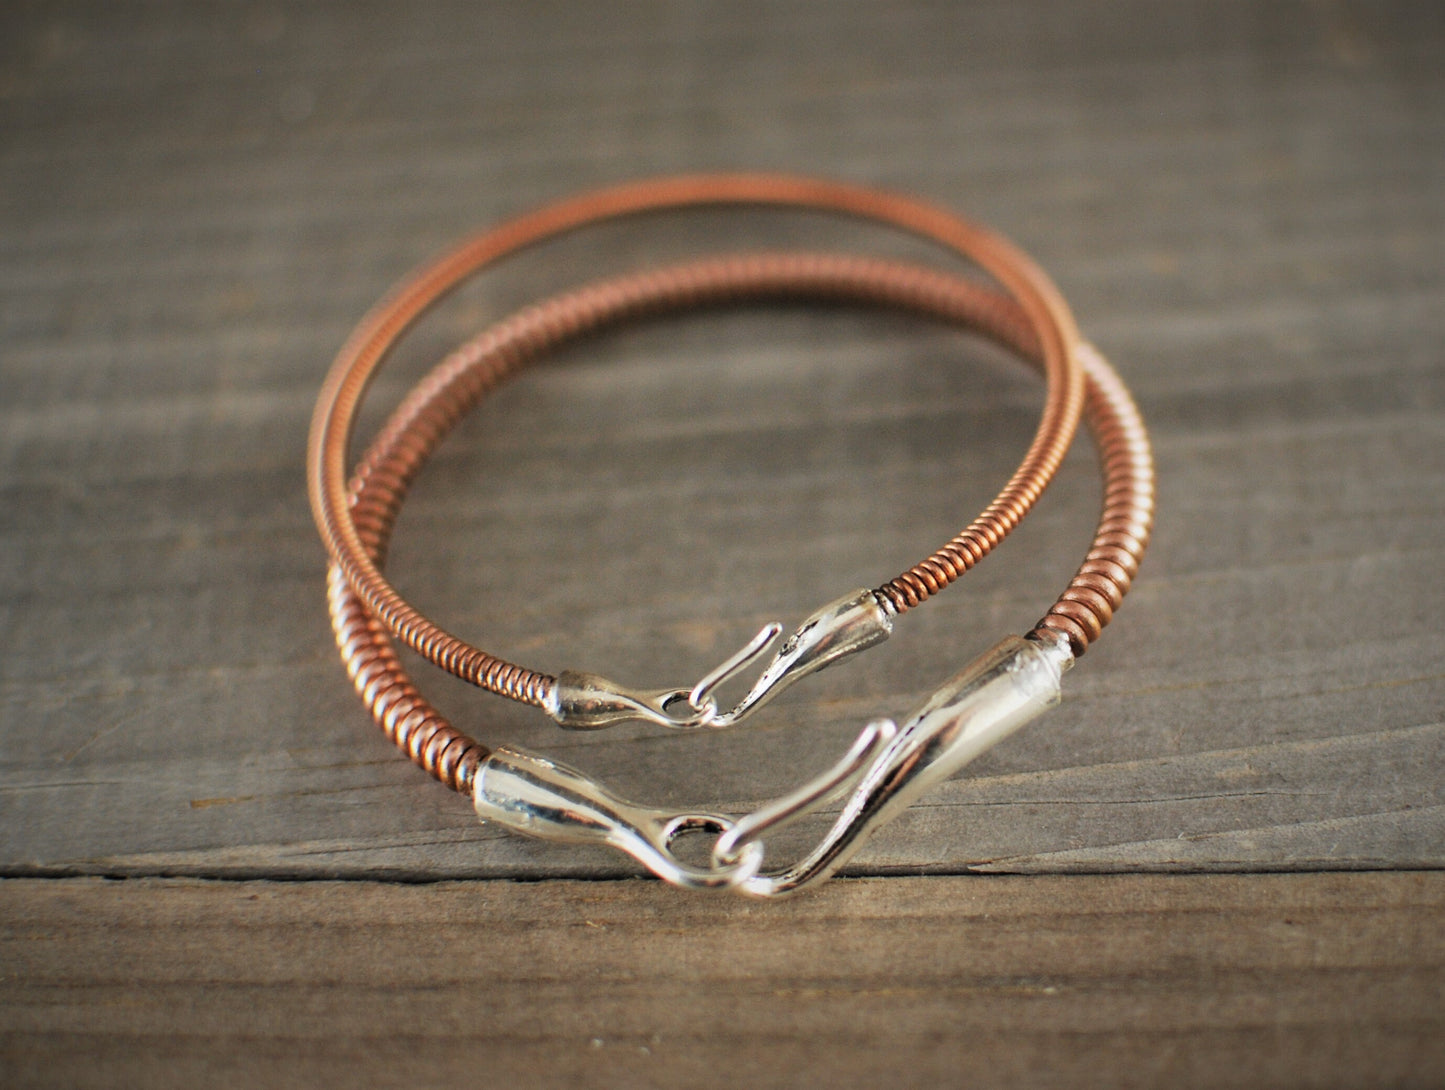 Piano String Bracelet, Hook and Eye Clasp, Piano Wire Bracelet, Piano Gifts, Piano Teacher Gift, Pianist Gift, Piano Wire, Copper Bracelet